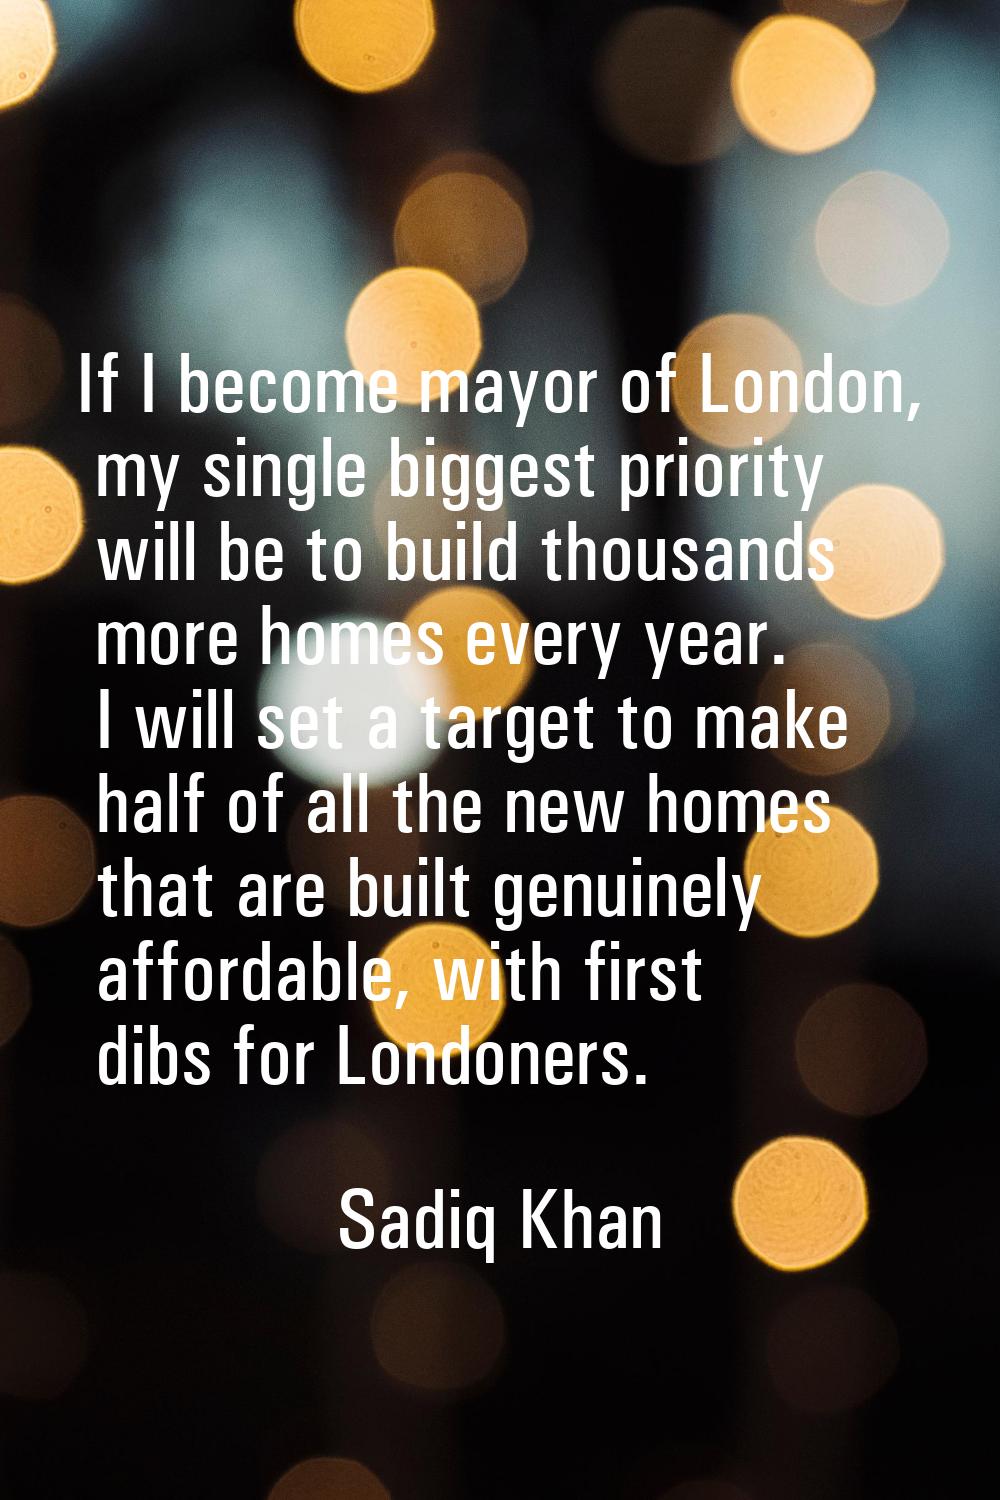 If I become mayor of London, my single biggest priority will be to build thousands more homes every